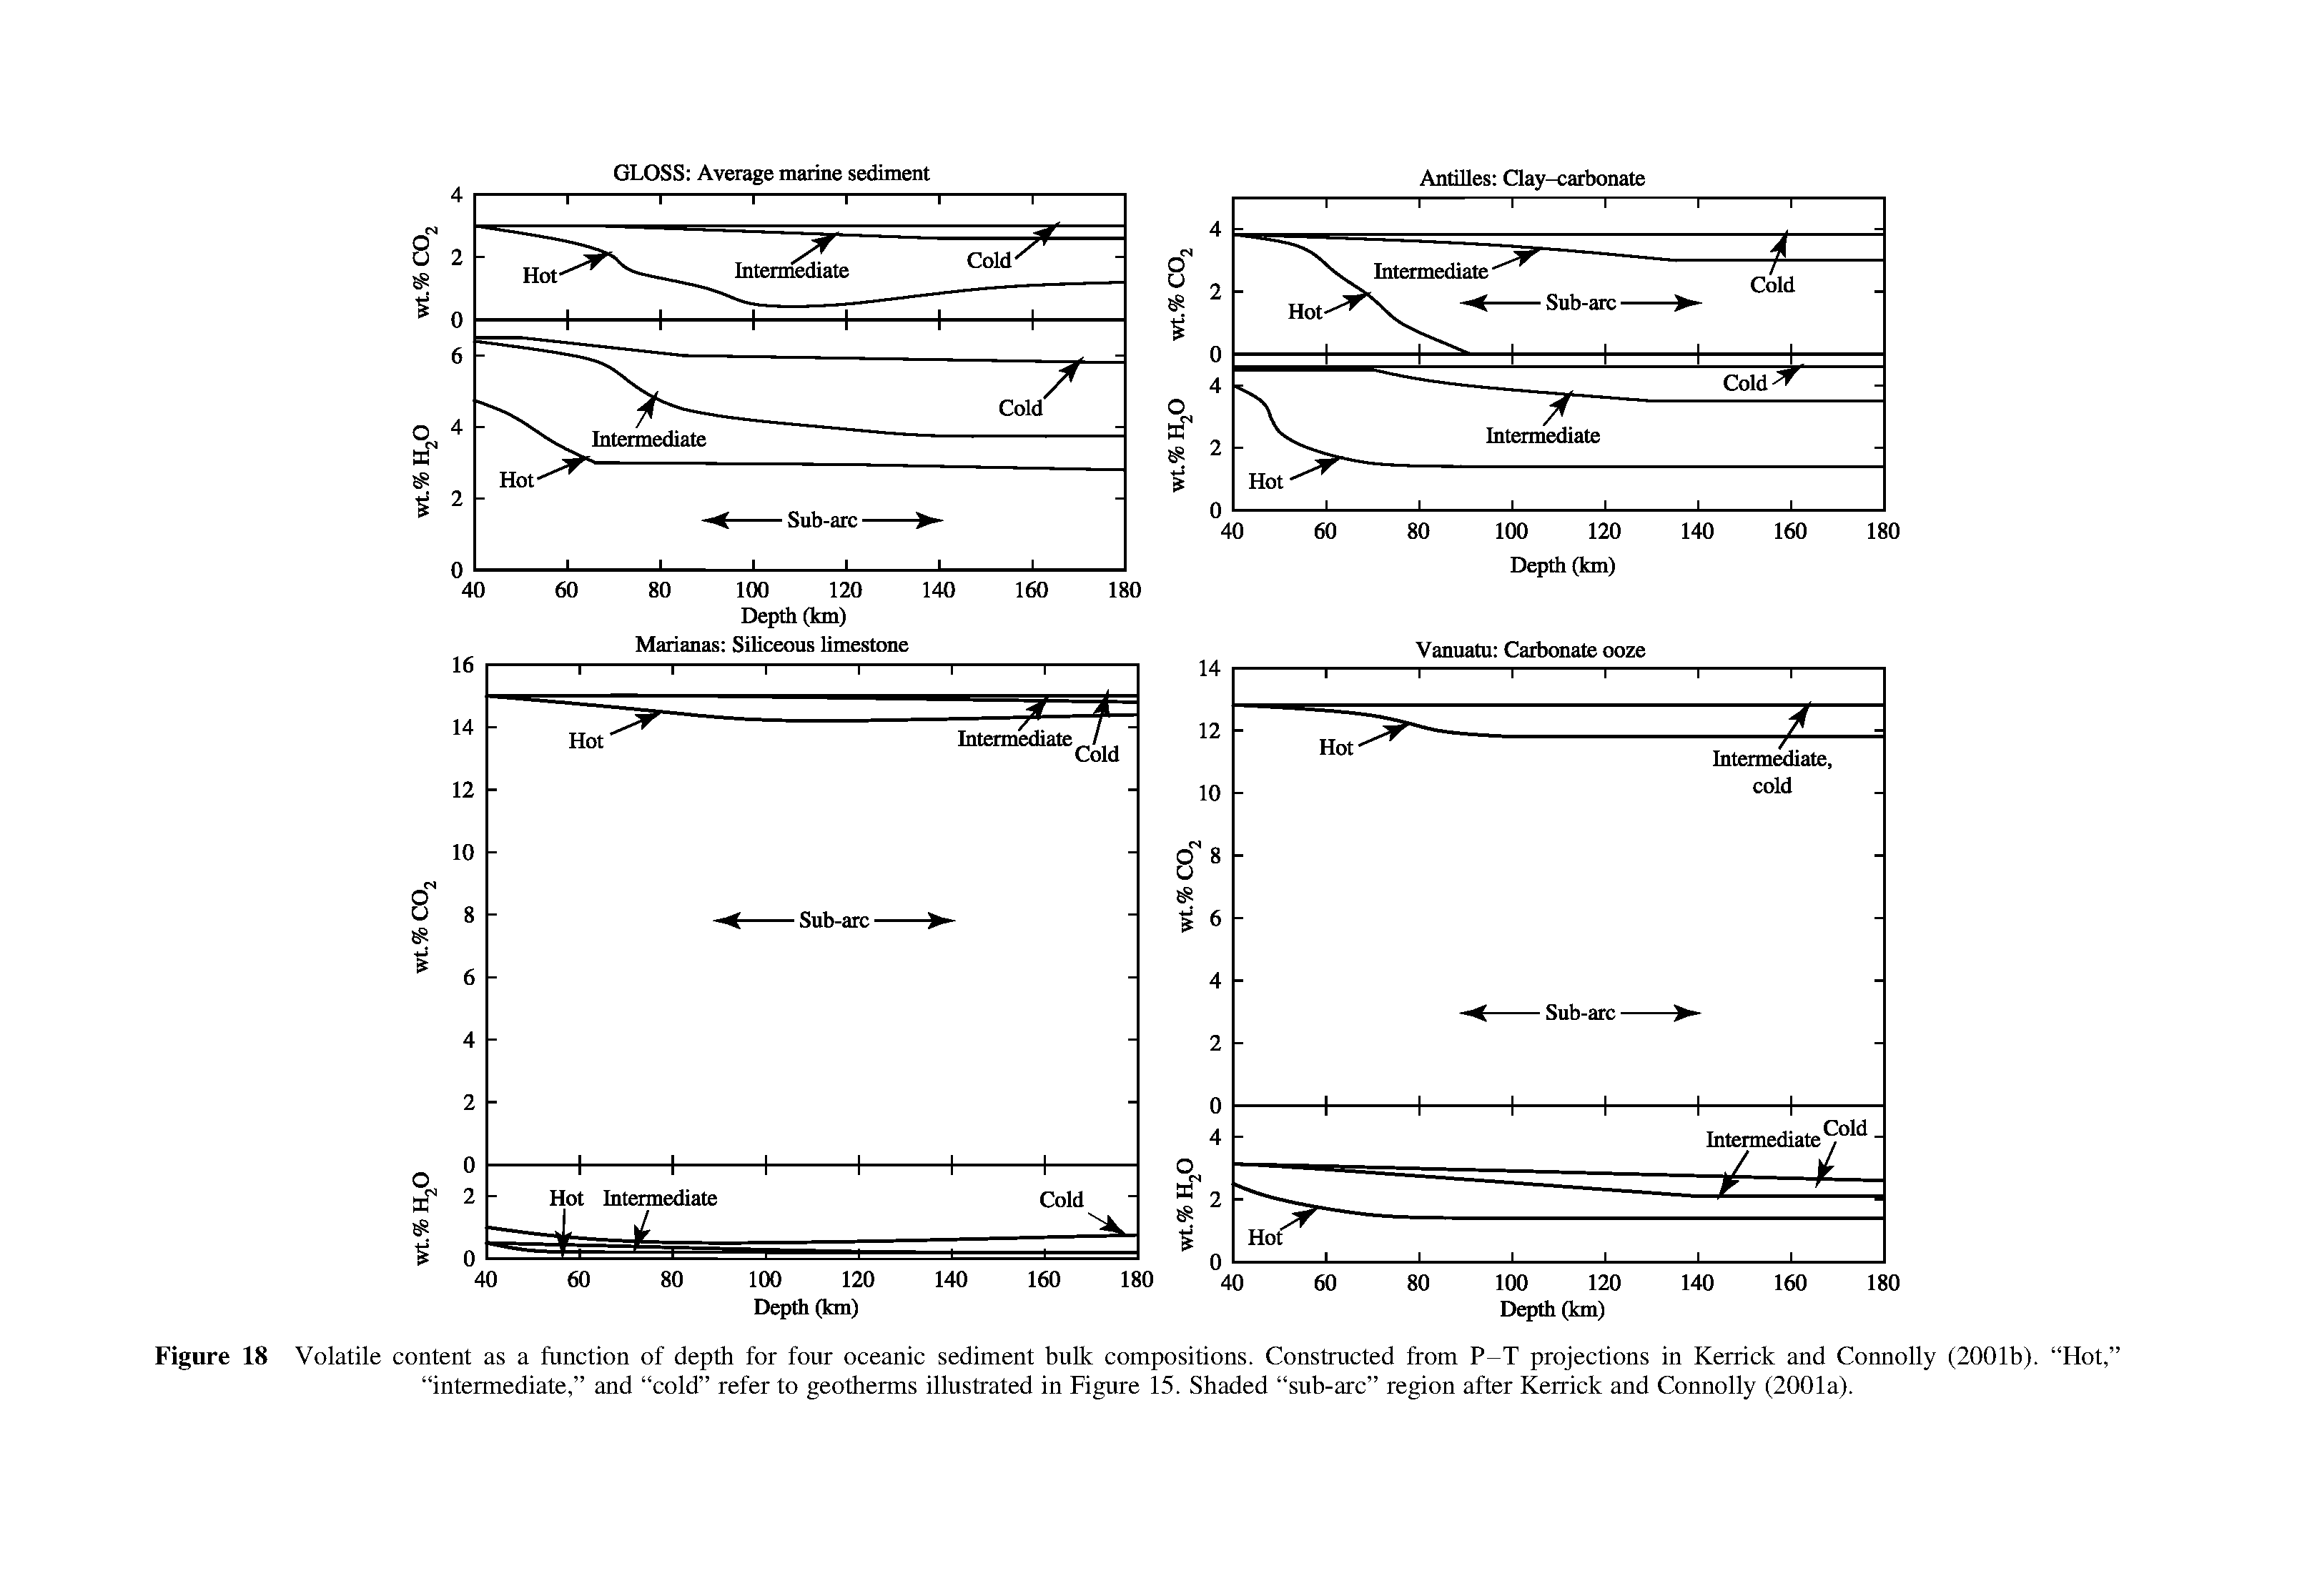 Figure 18 Volatile content as a function of depth for four oceanic sediment bulk compositions. Constructed from P-T projections in Kerrick and Connolly (2001b). Hot, intermediate, and cold refer to geotherms illustrated in Figure 15. Shaded sub-arc region after Kerrick and Connolly (2001a).